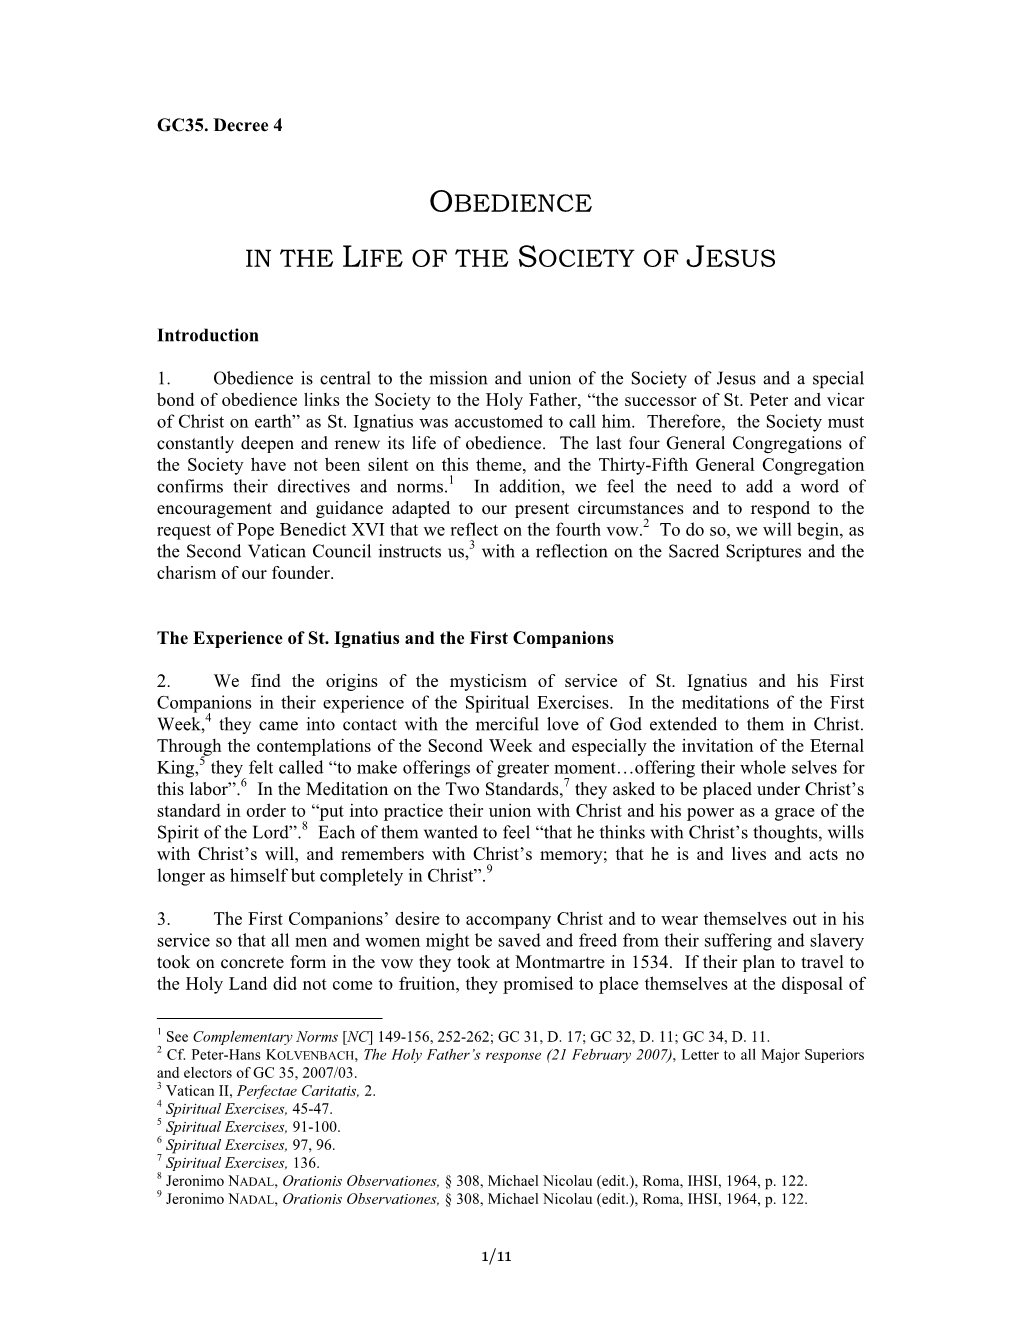 Decree 4: Obedience in the Life of the Society of Jesus